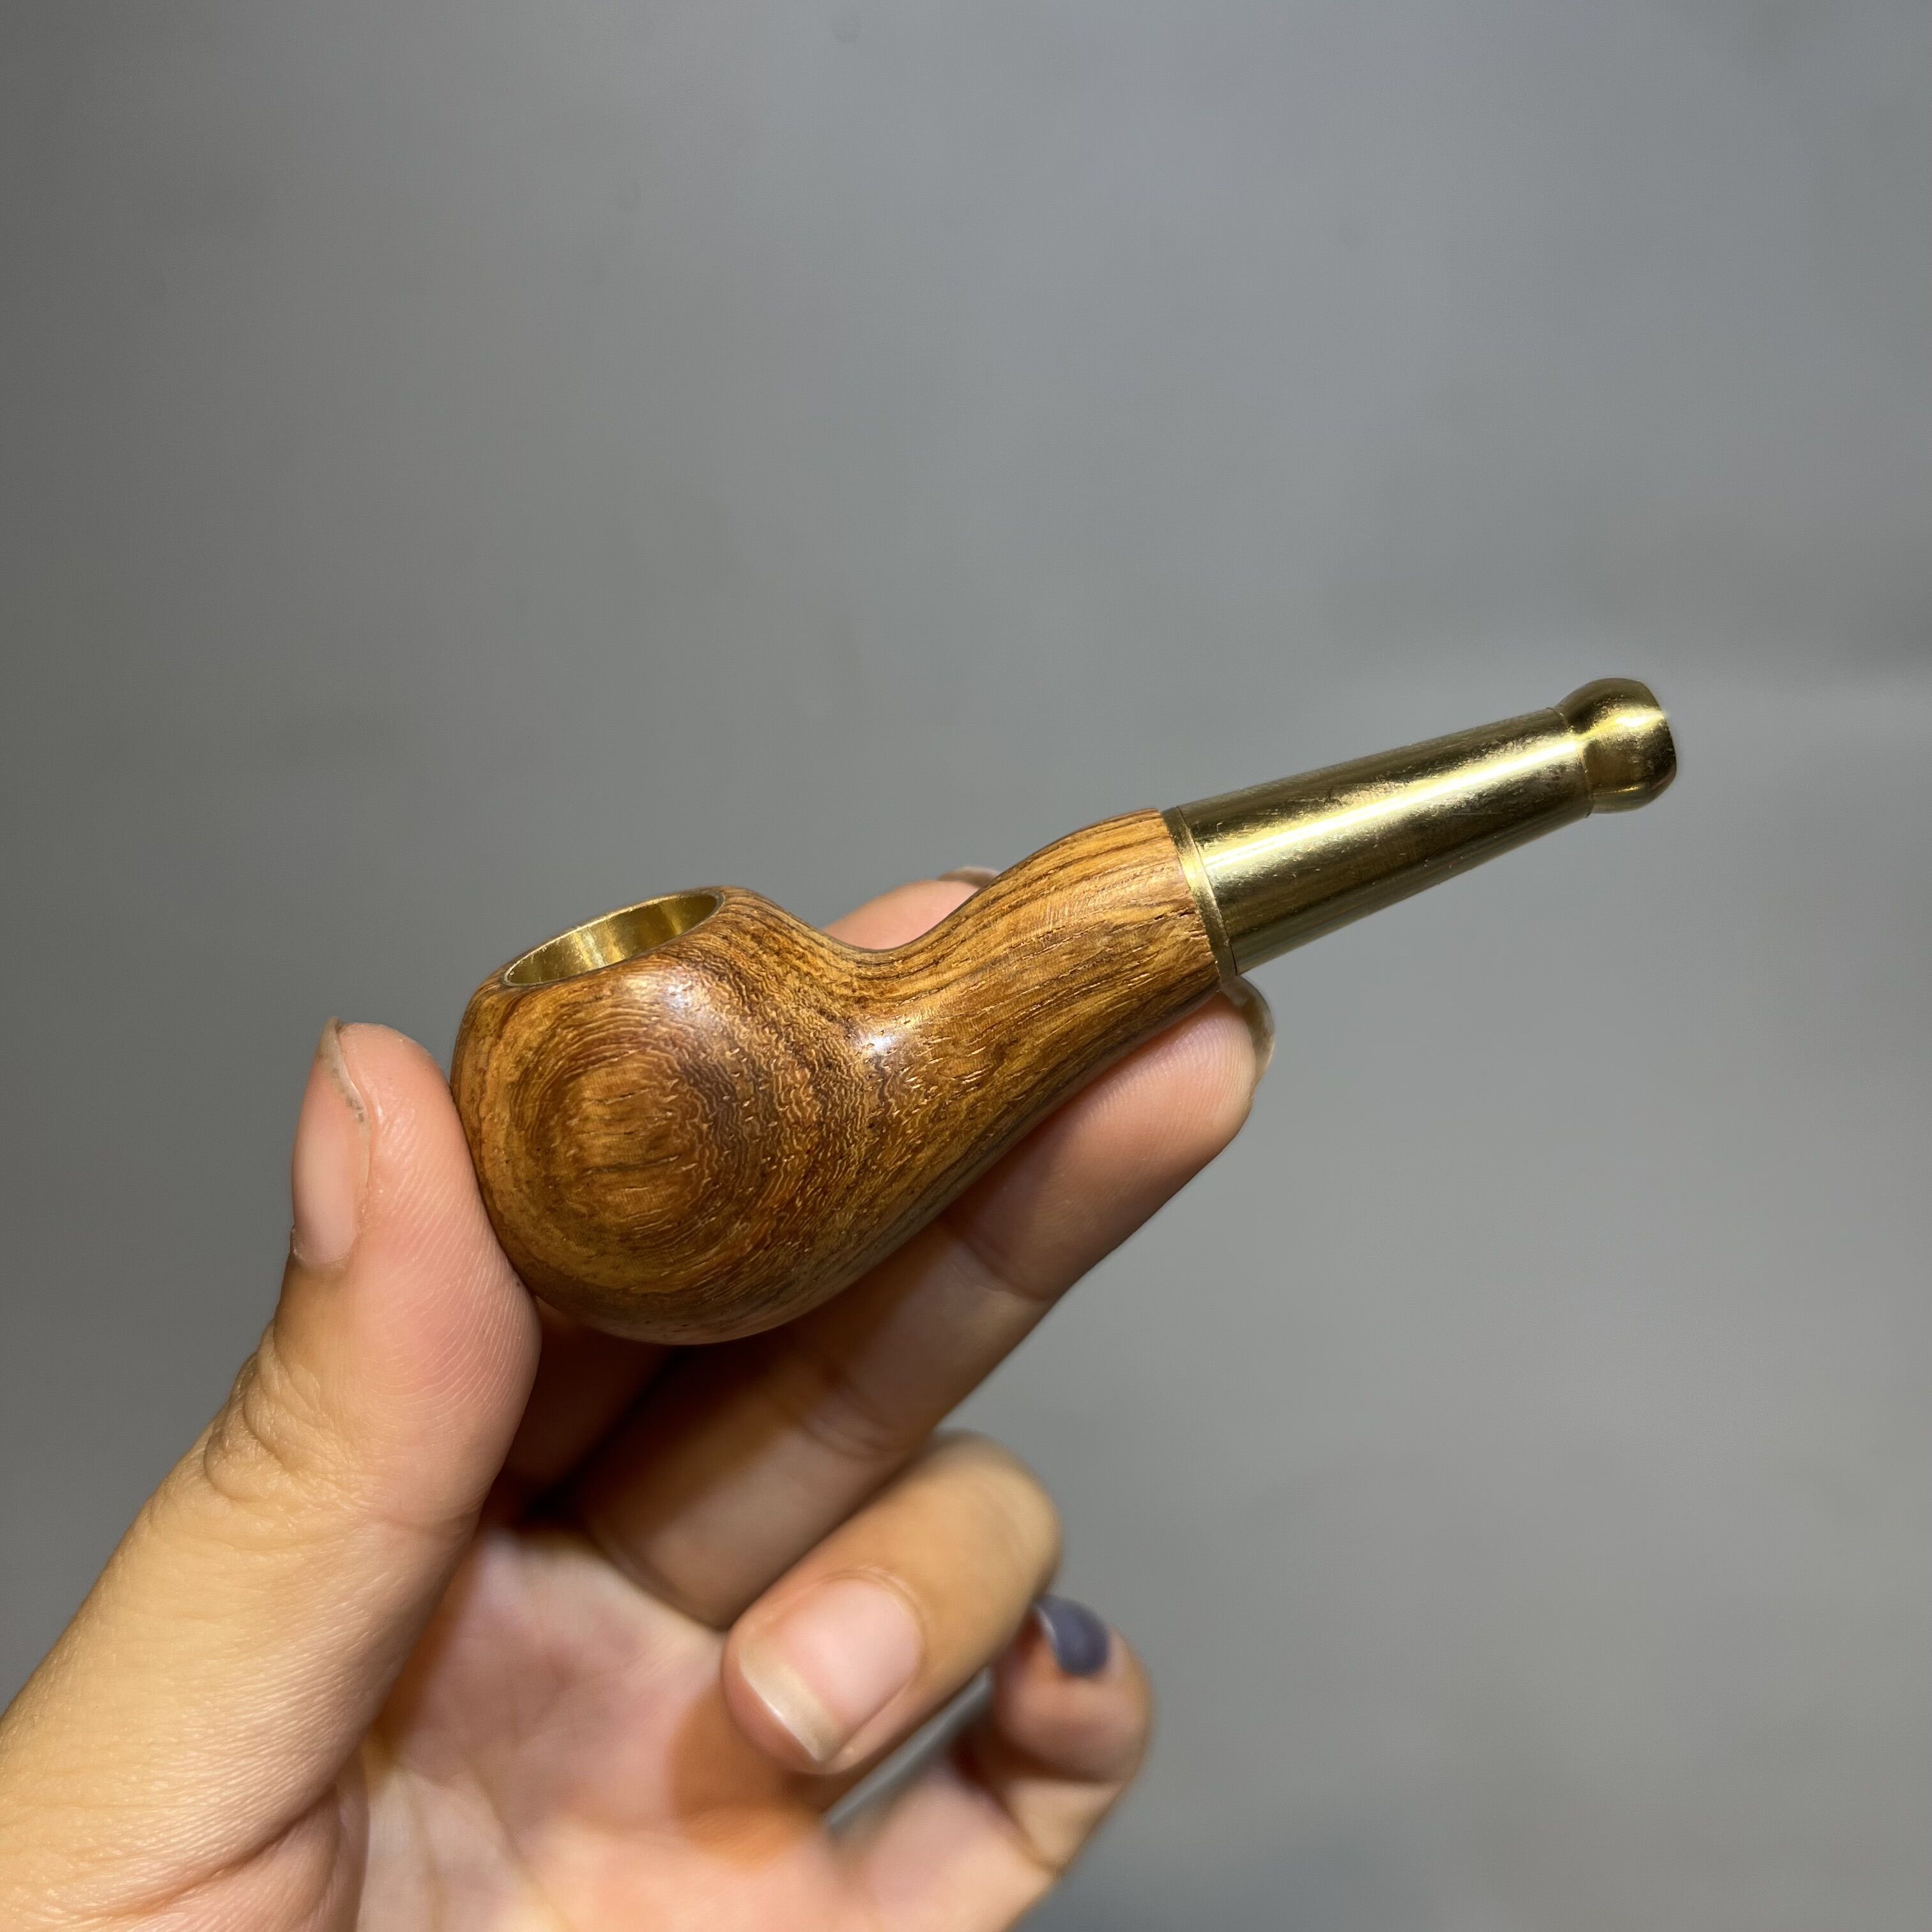 Brass Tobacco Pipe - Compact and Stylish